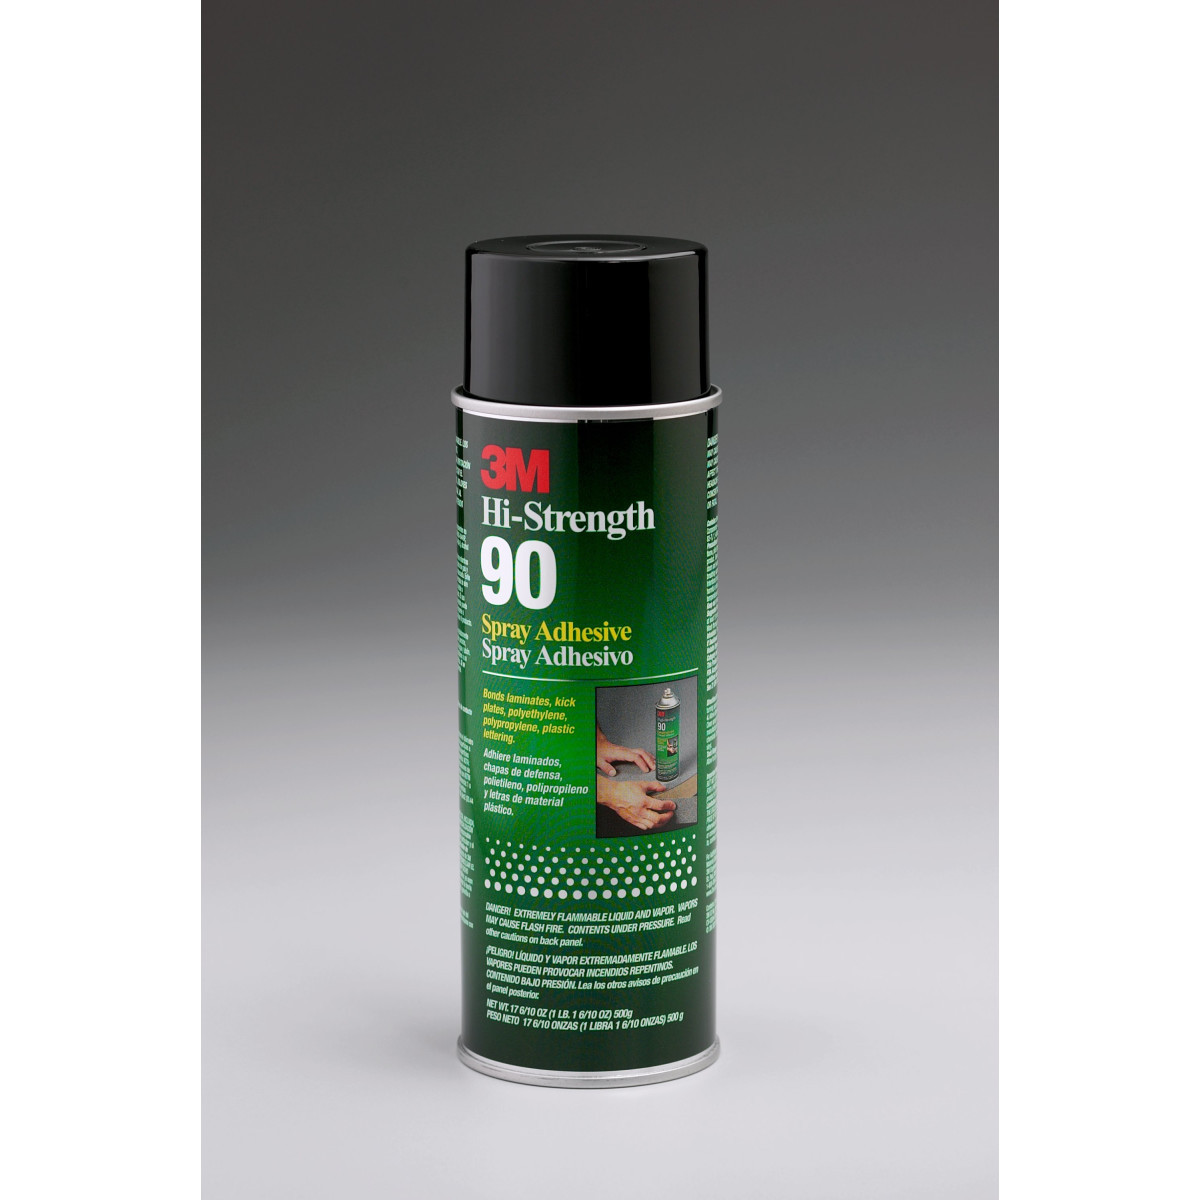 3M Spray Adhesive, Aerosol Can, 16.75 oz. Container Size - Adhesives - Super 77, Size: 16.5 oz Can, Black